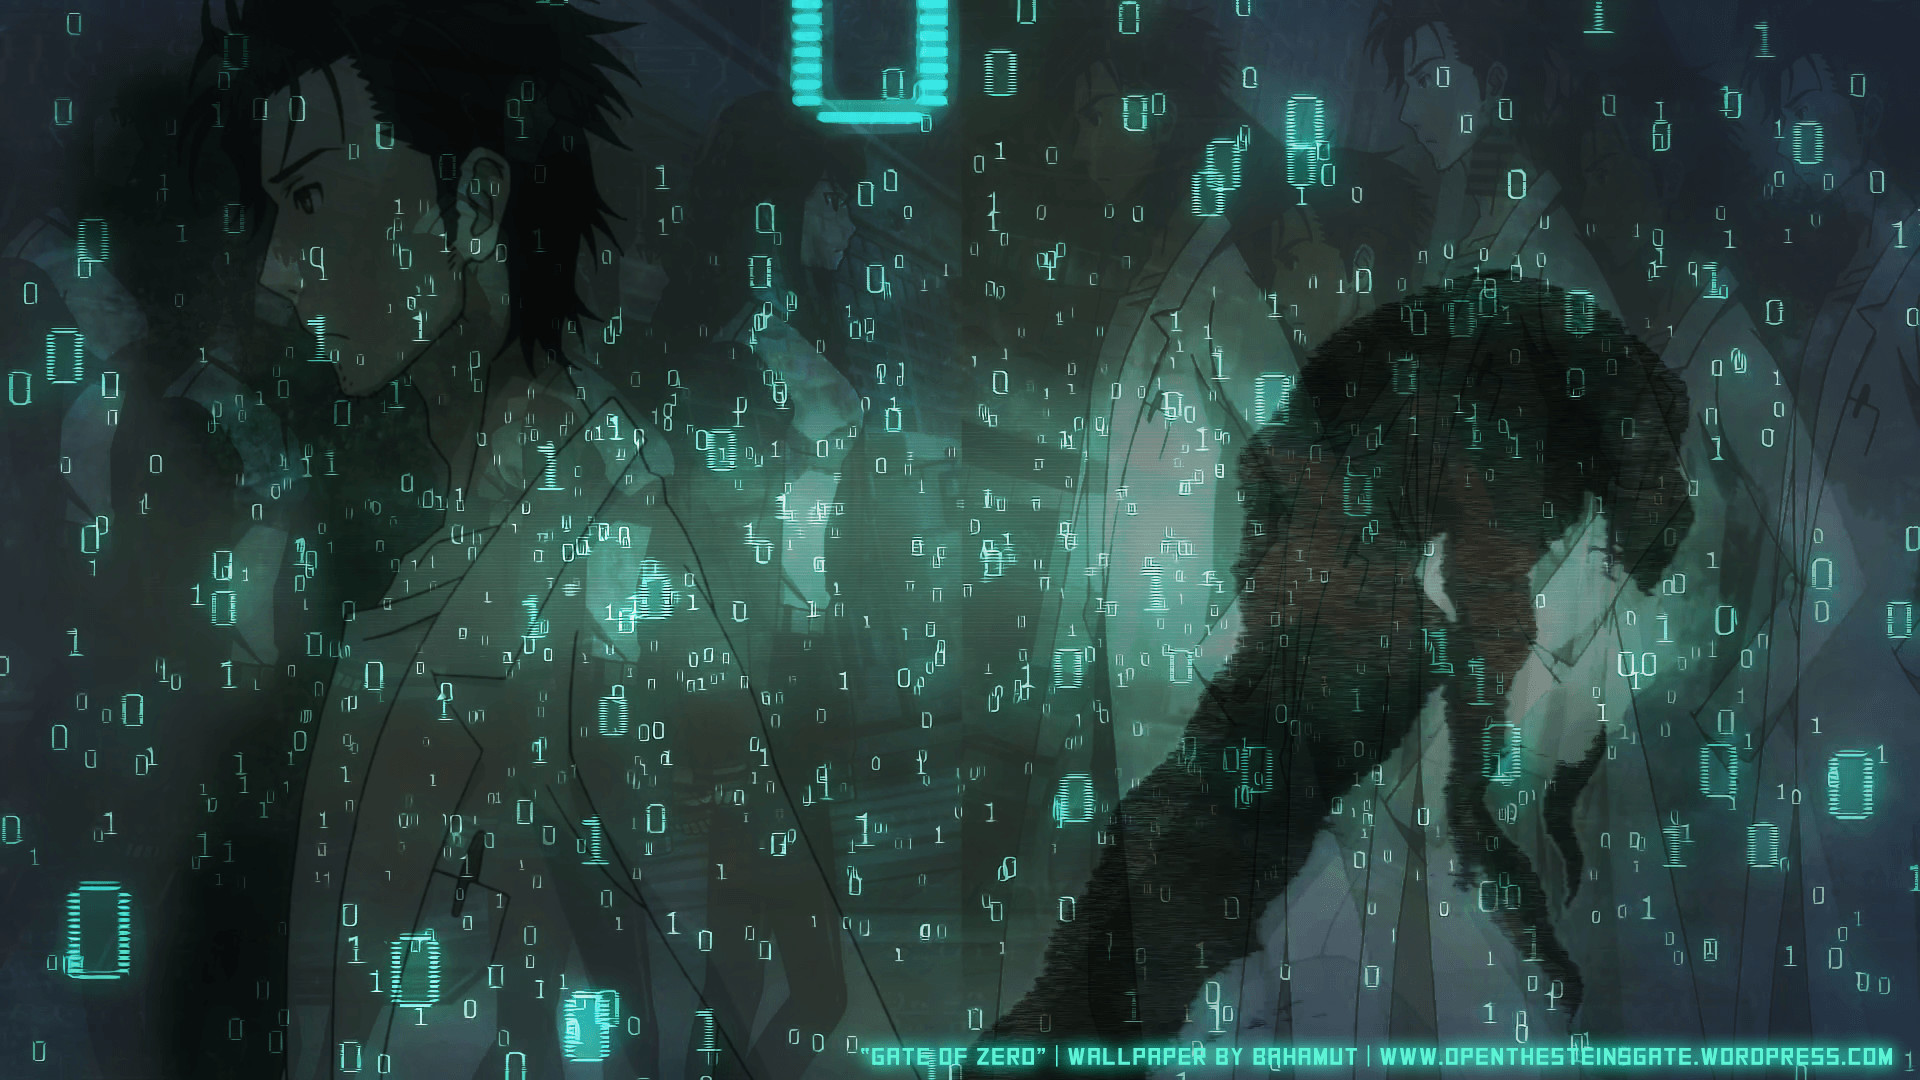 1920x1080 Gate of Zero" a wallpaper that I made inspired by the Steins;Gate .